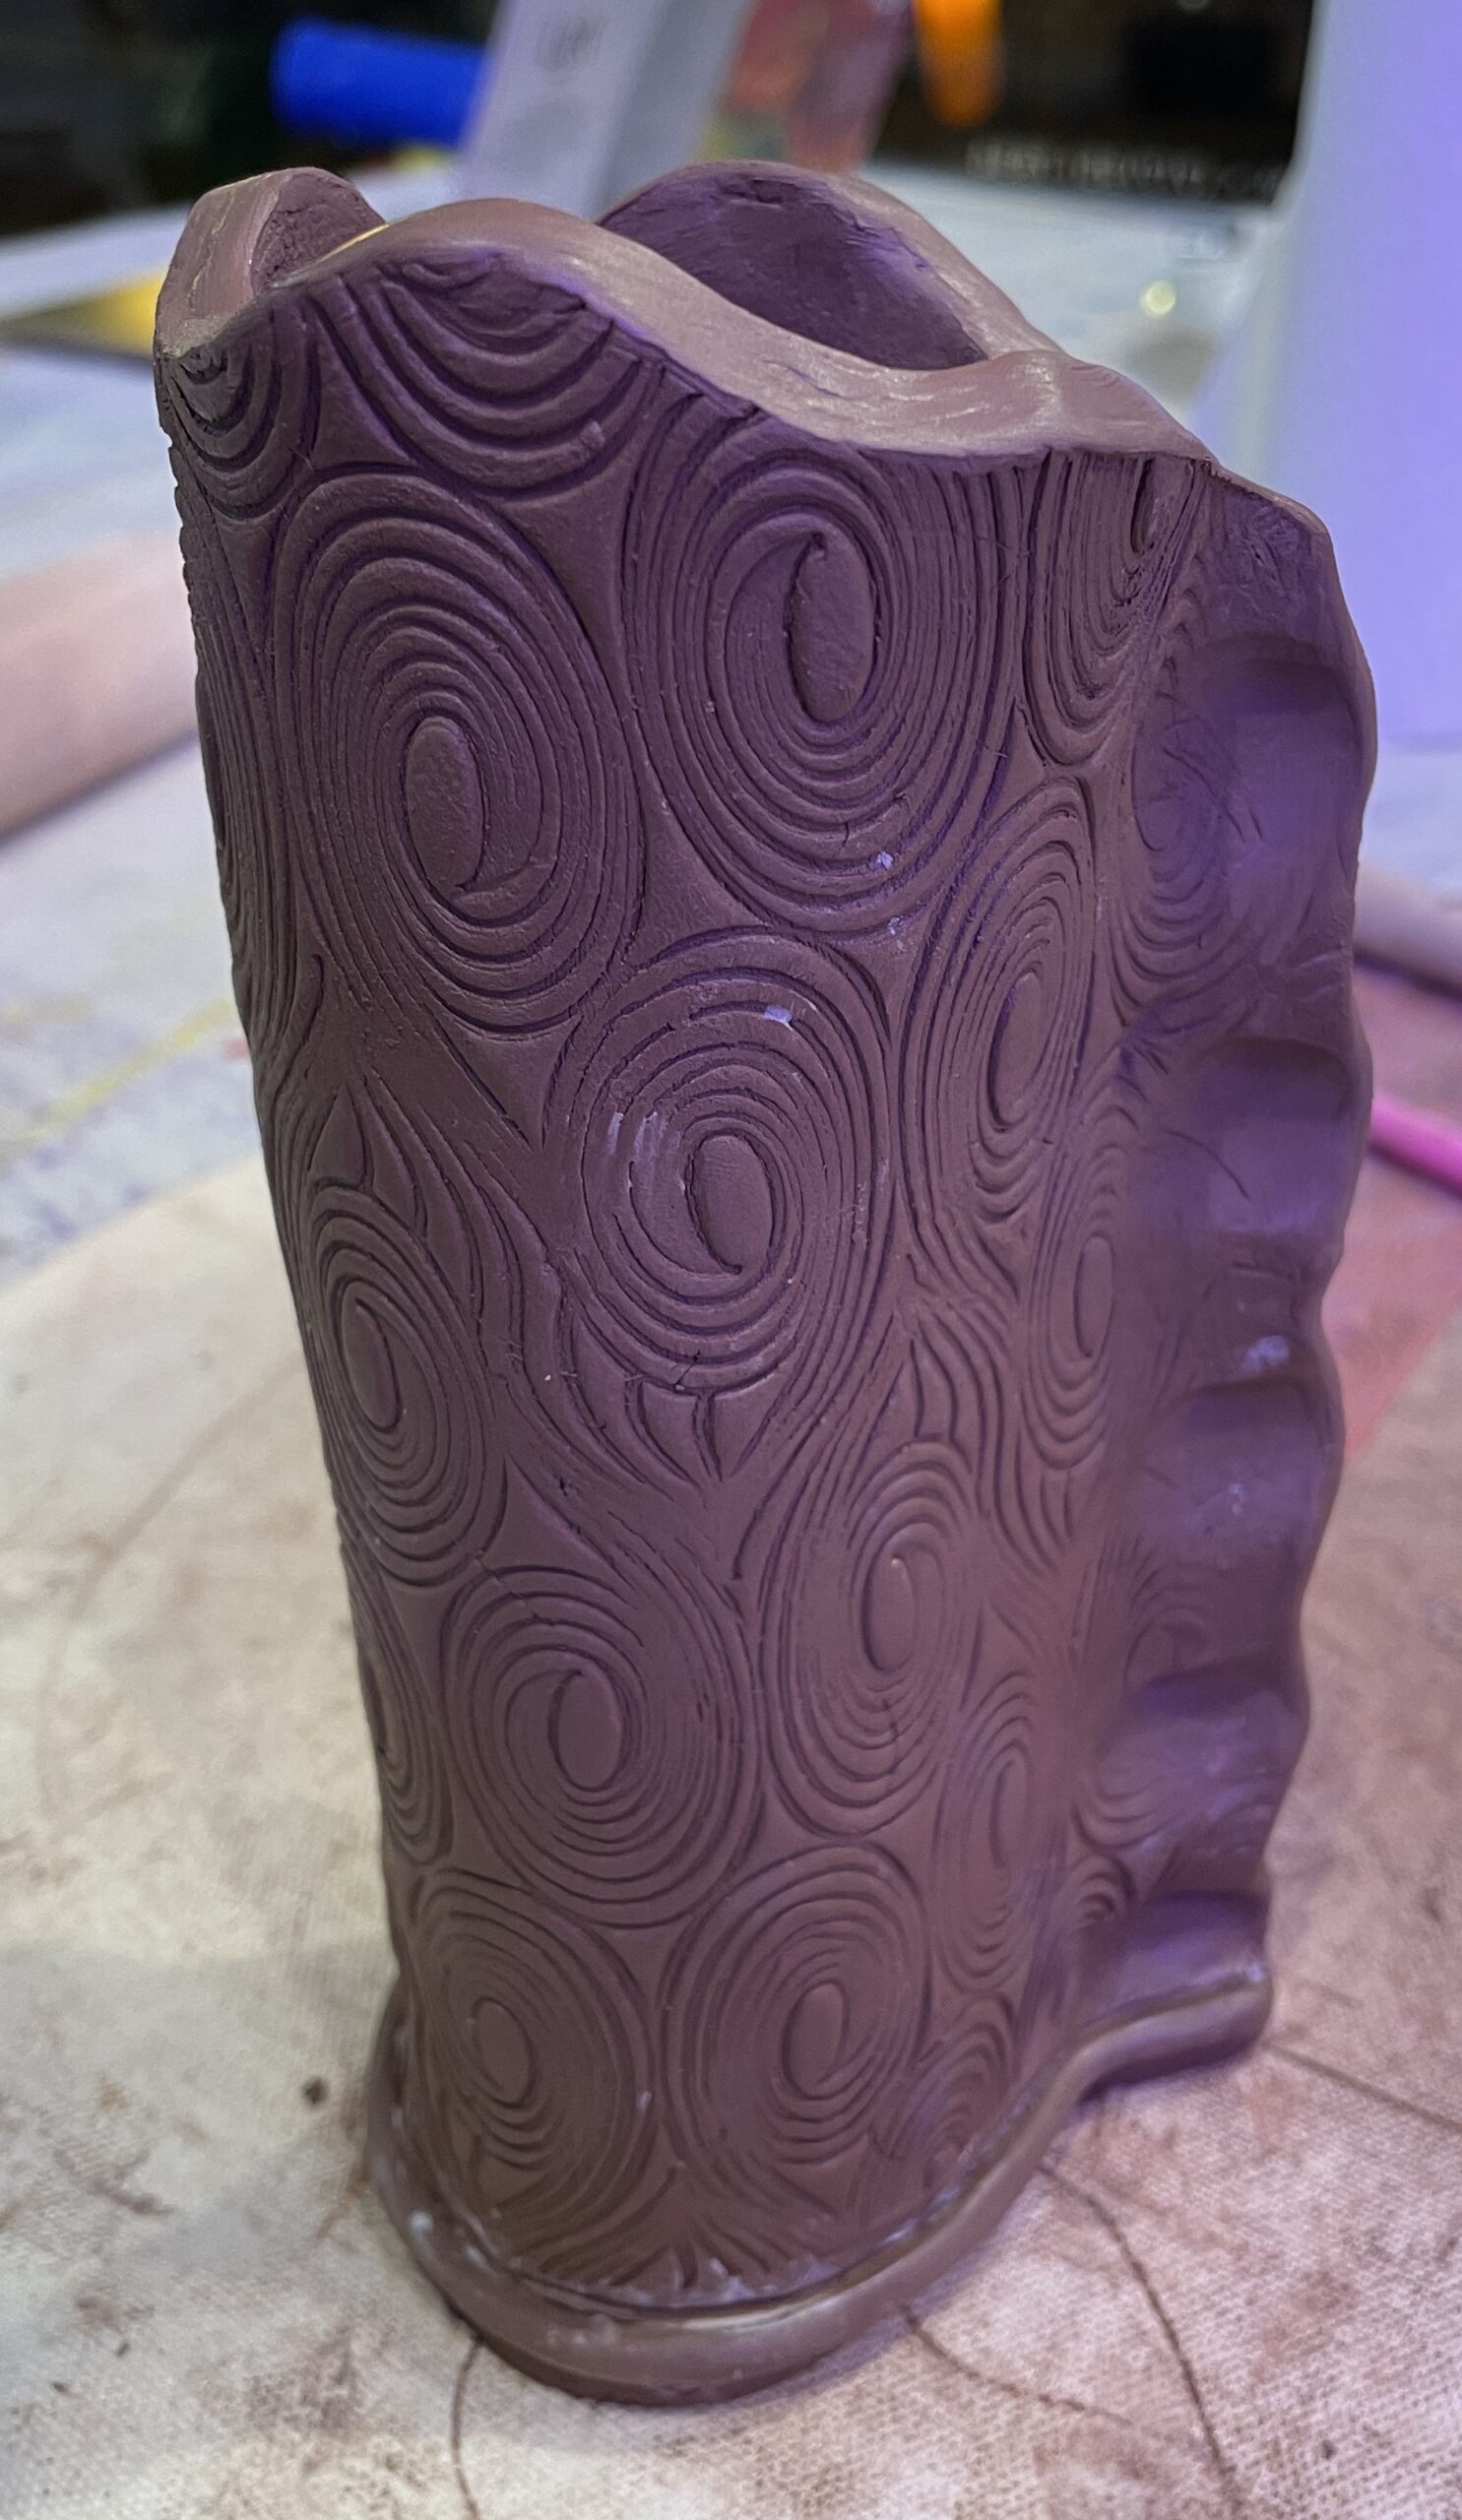 Textured Vase build with clay